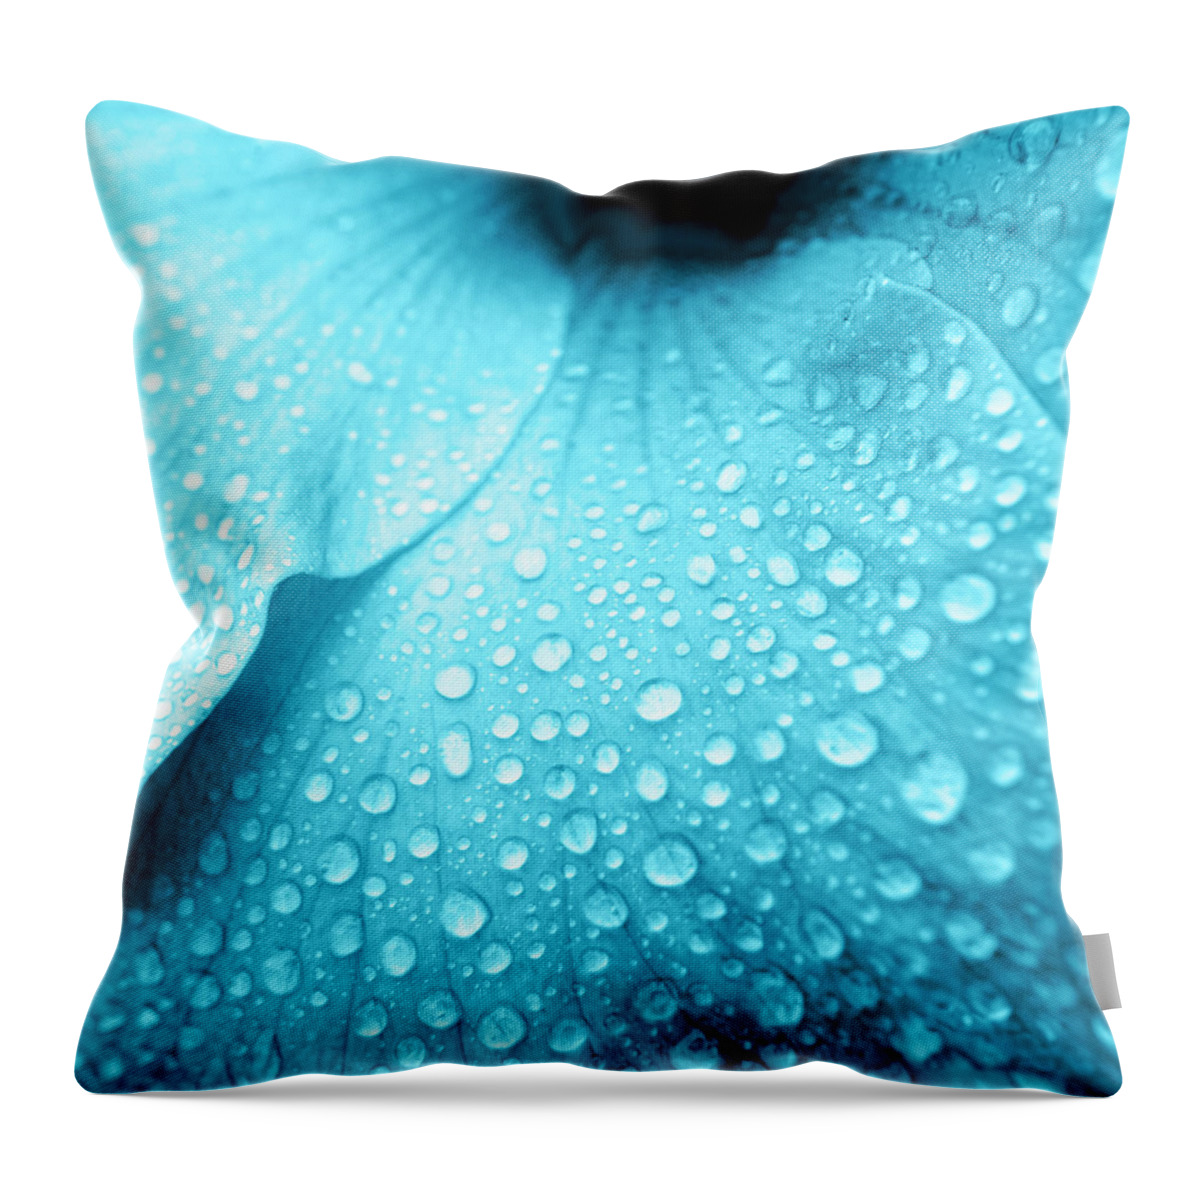 Hibiscus Flower Throw Pillow featuring the photograph Aqua droplets by Sean Davey